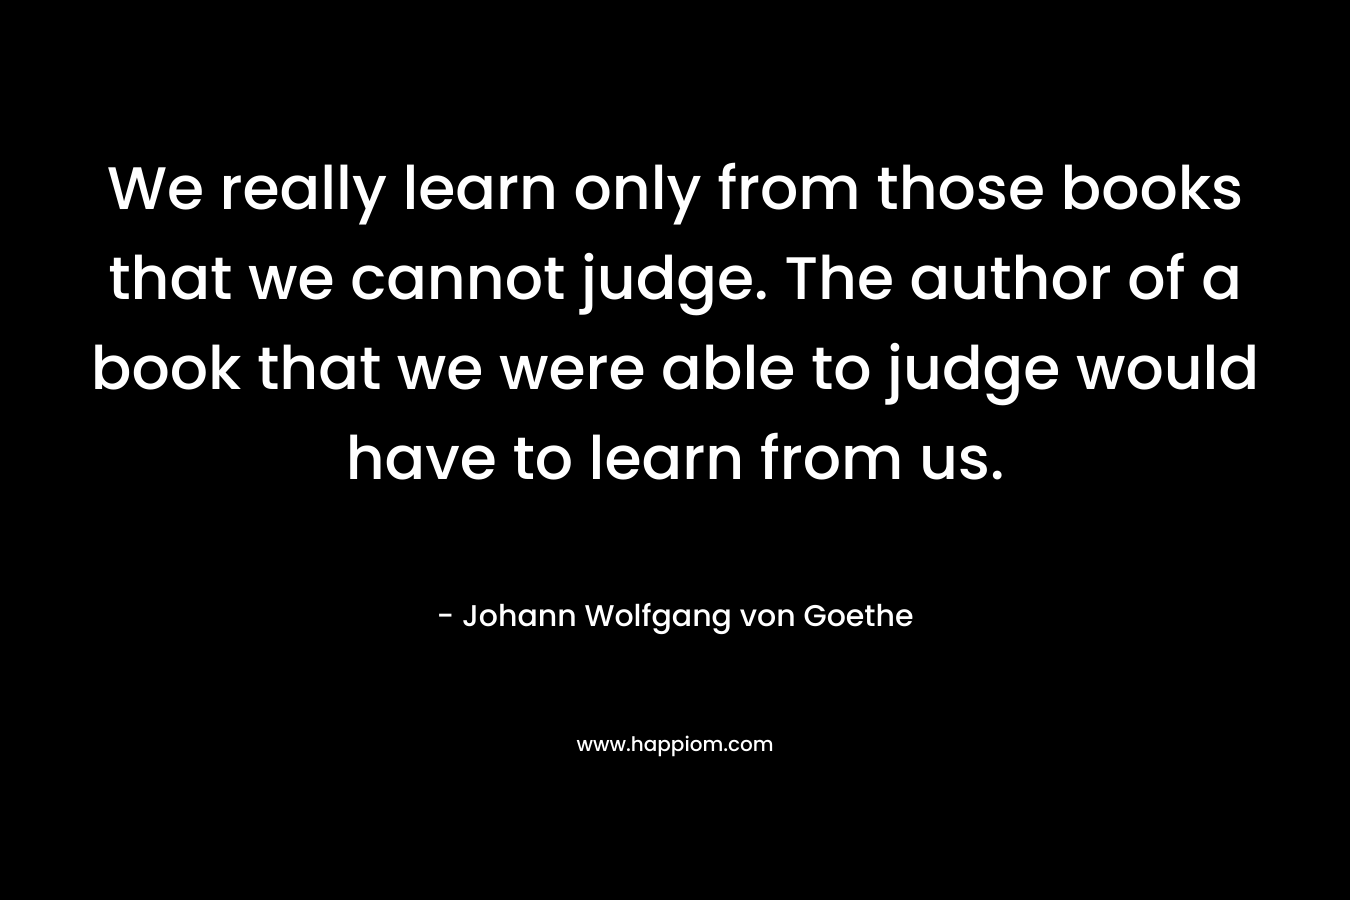 We really learn only from those books that we cannot judge. The author of a book that we were able to judge would have to learn from us.